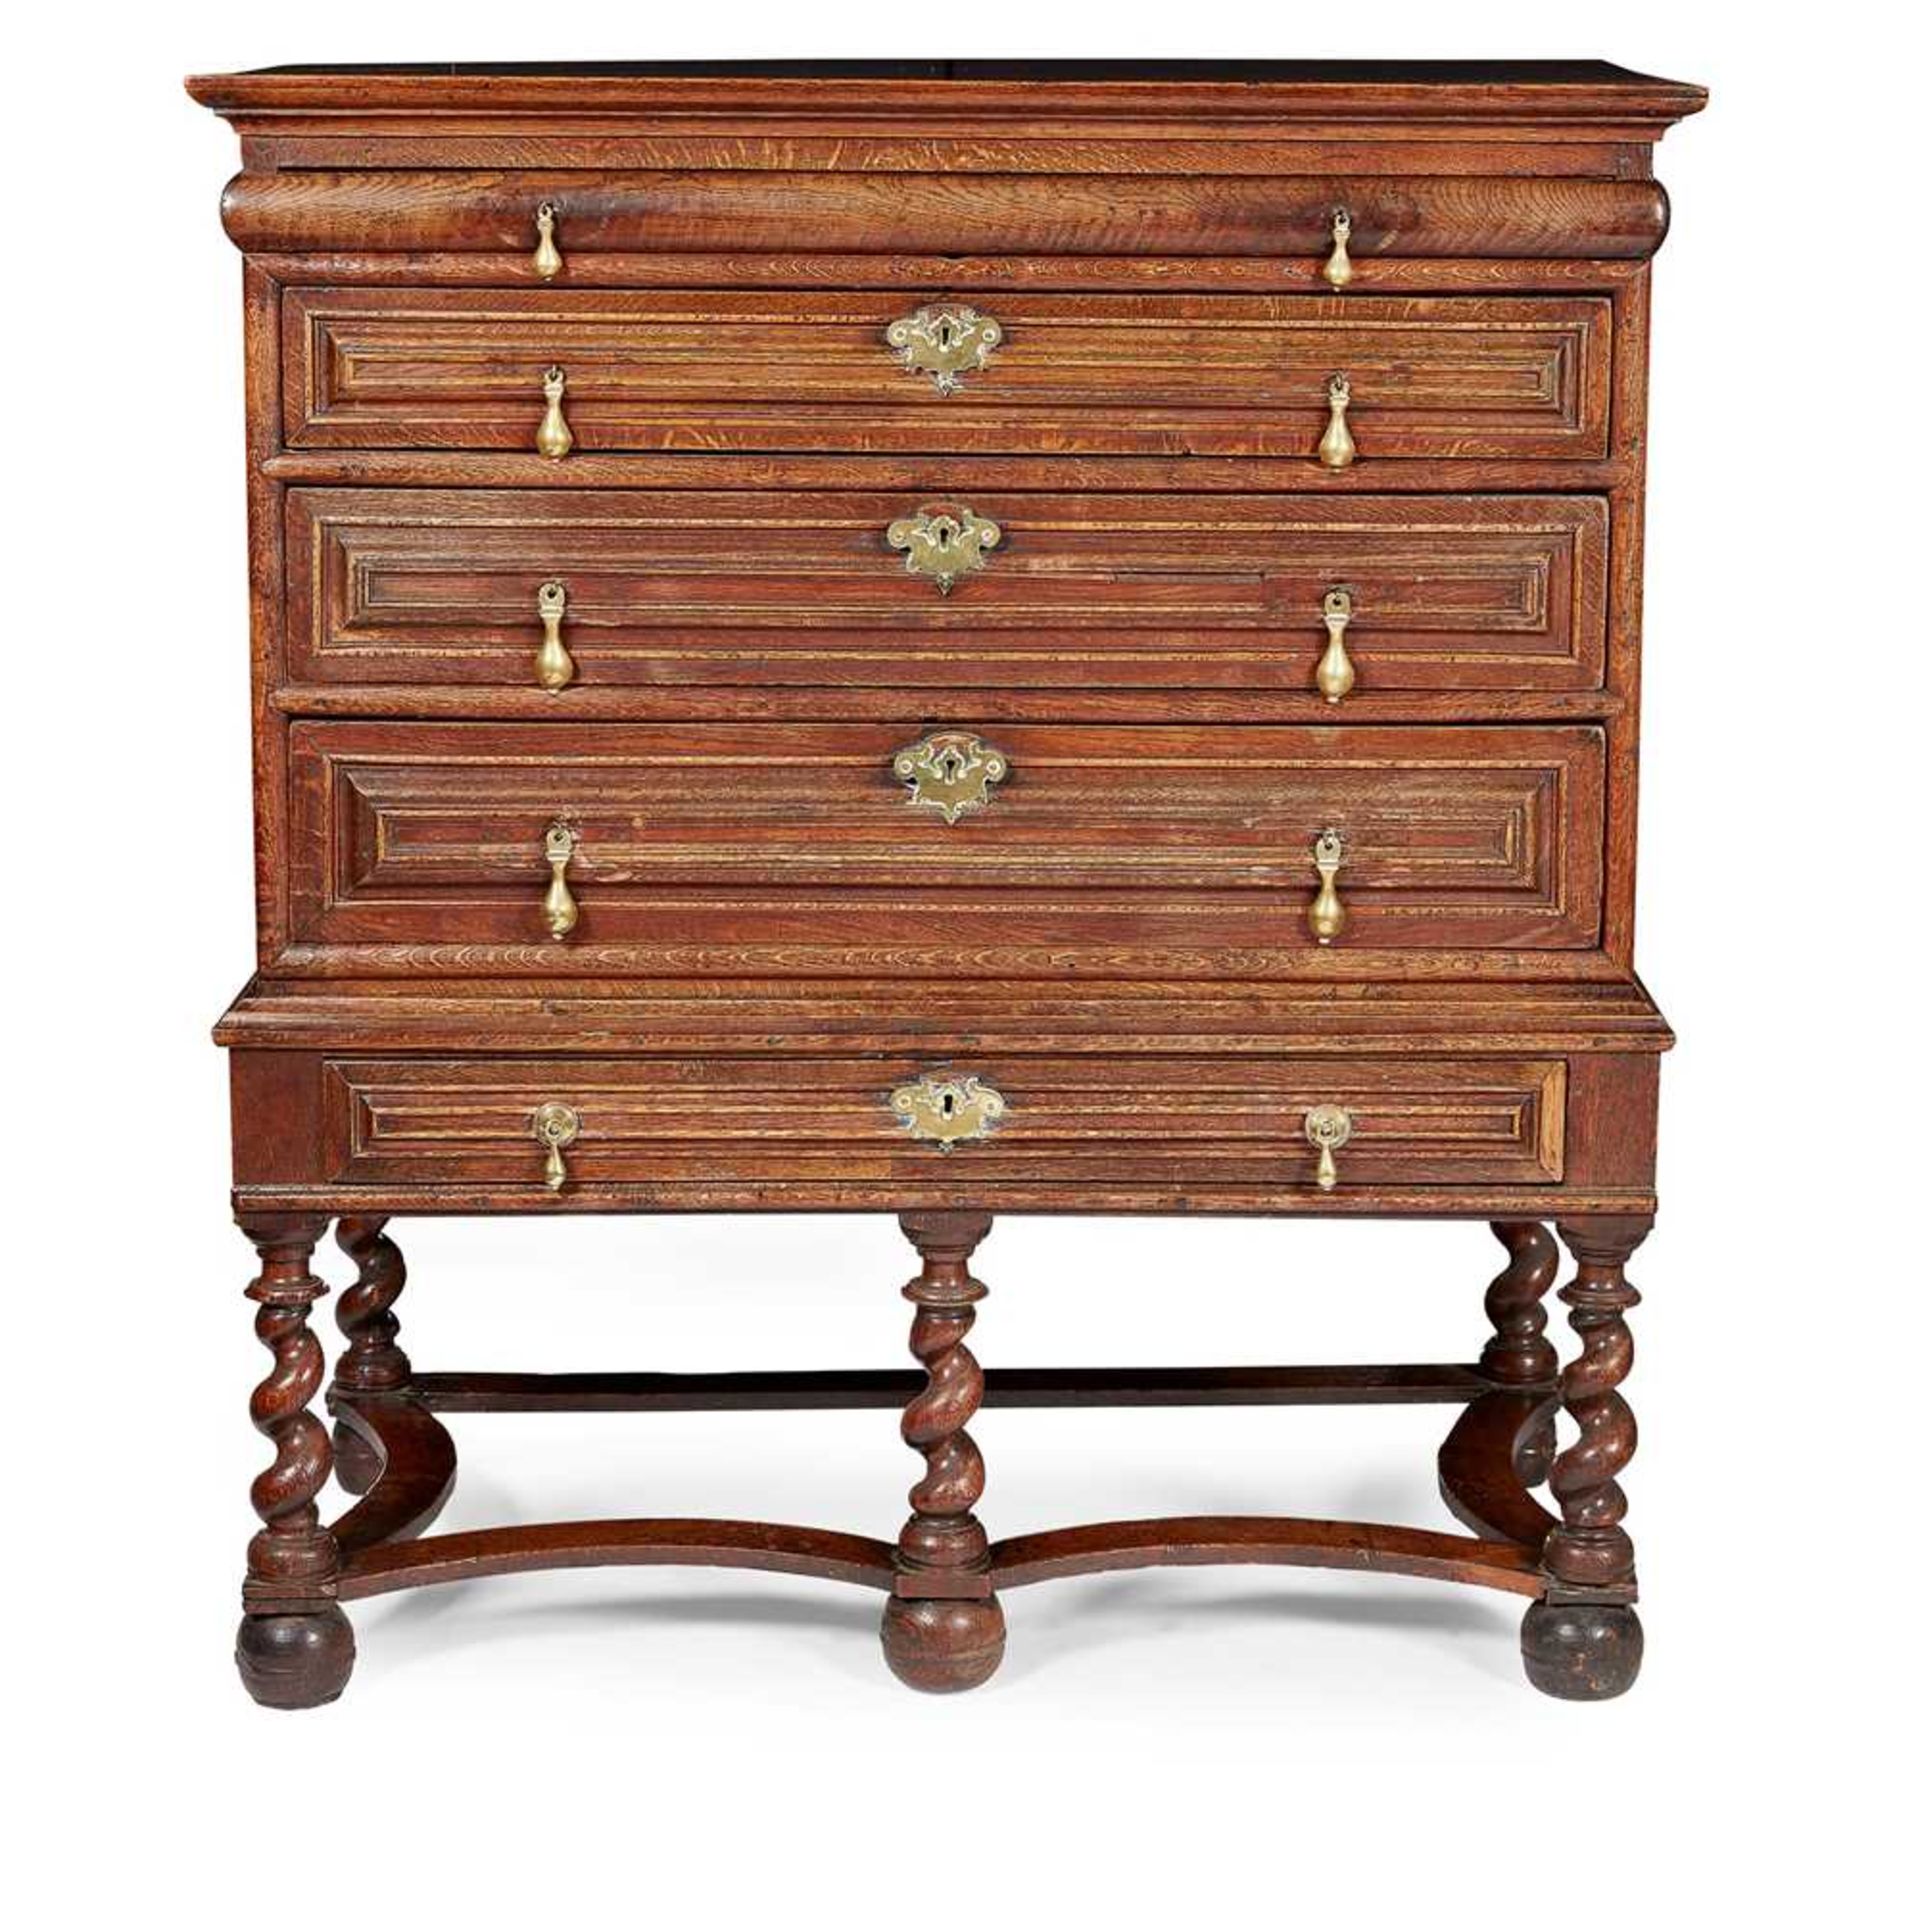 WILLIAM AND MARY OAK CHEST-ON-STAND LATE 17TH CENTURY